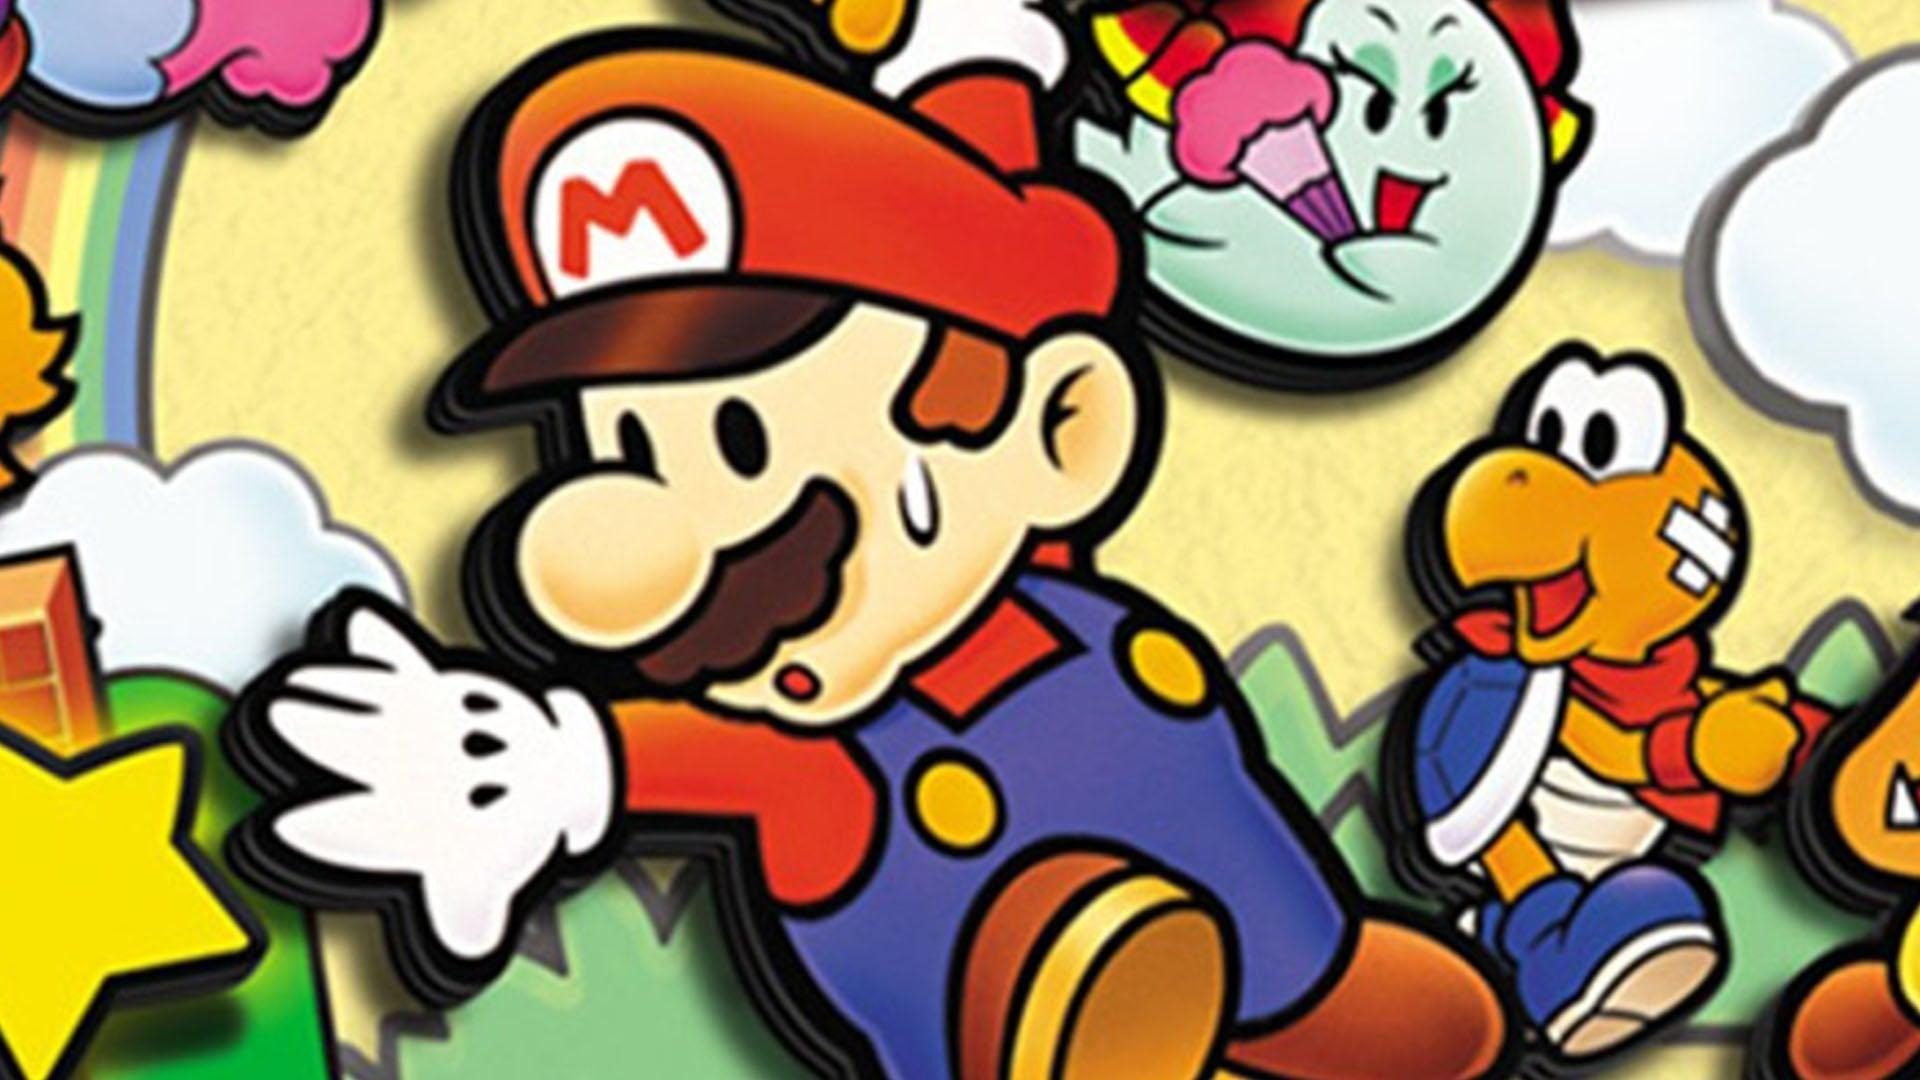 Paper Mario is coming to Nintend